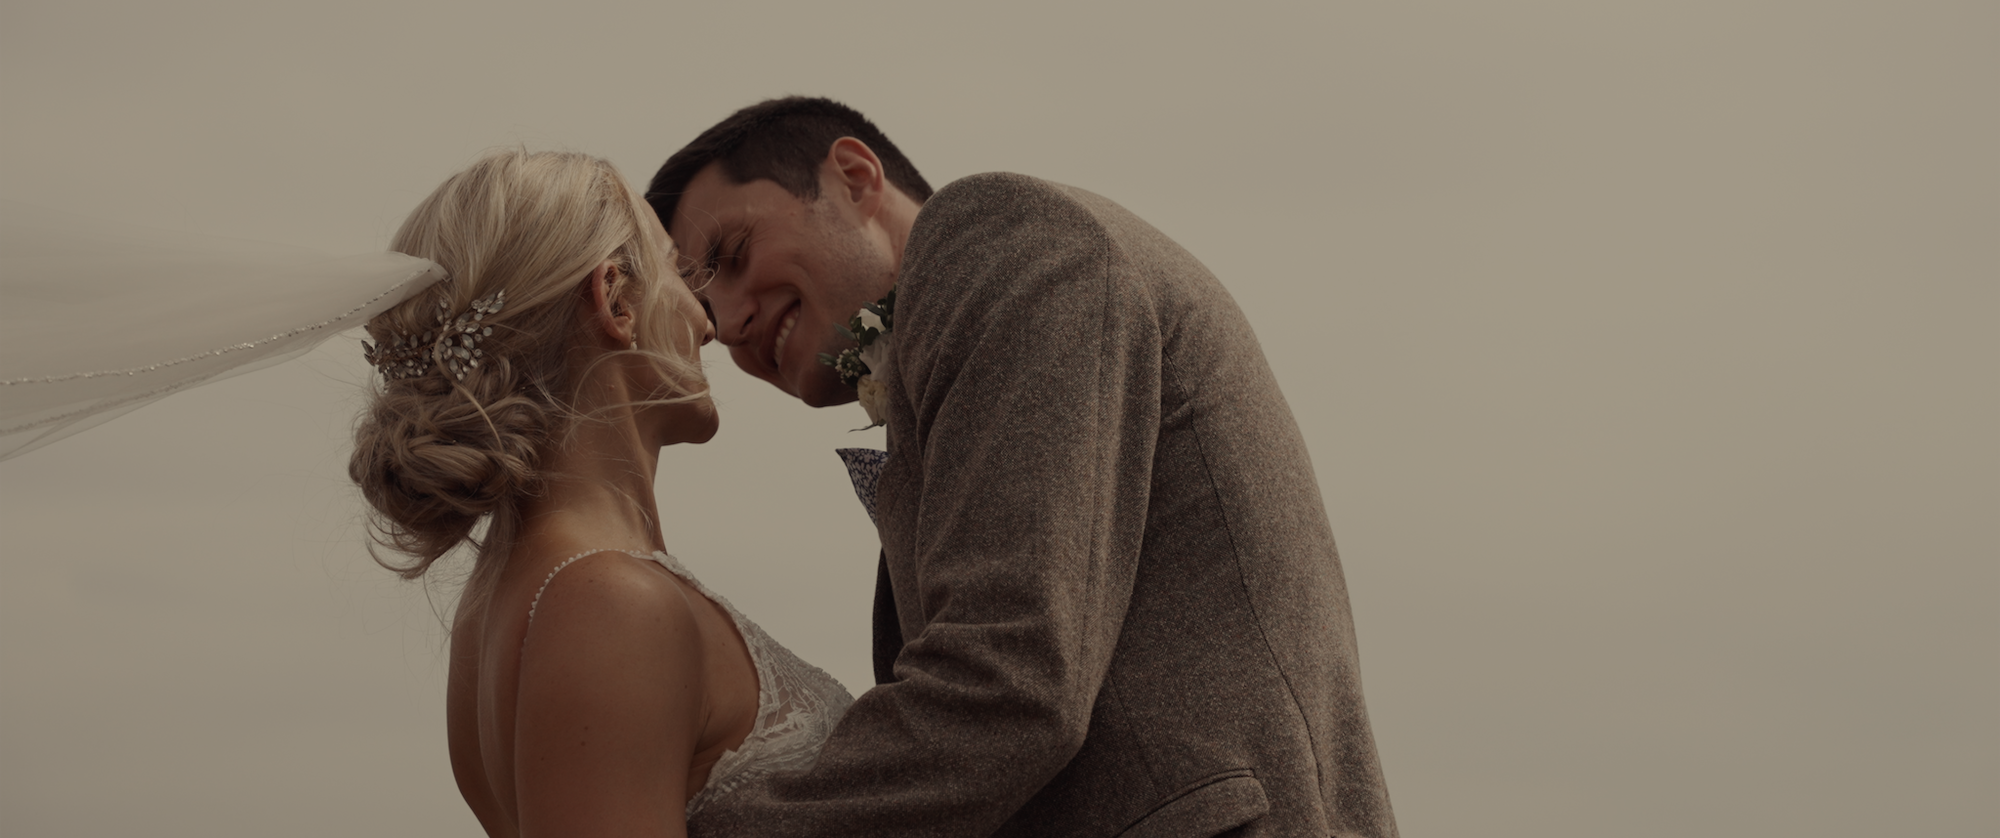 Oxwich Bay Hotel Wedding Videography by Ben Holbrook Films (Swansea South Wales).jpeg19.png